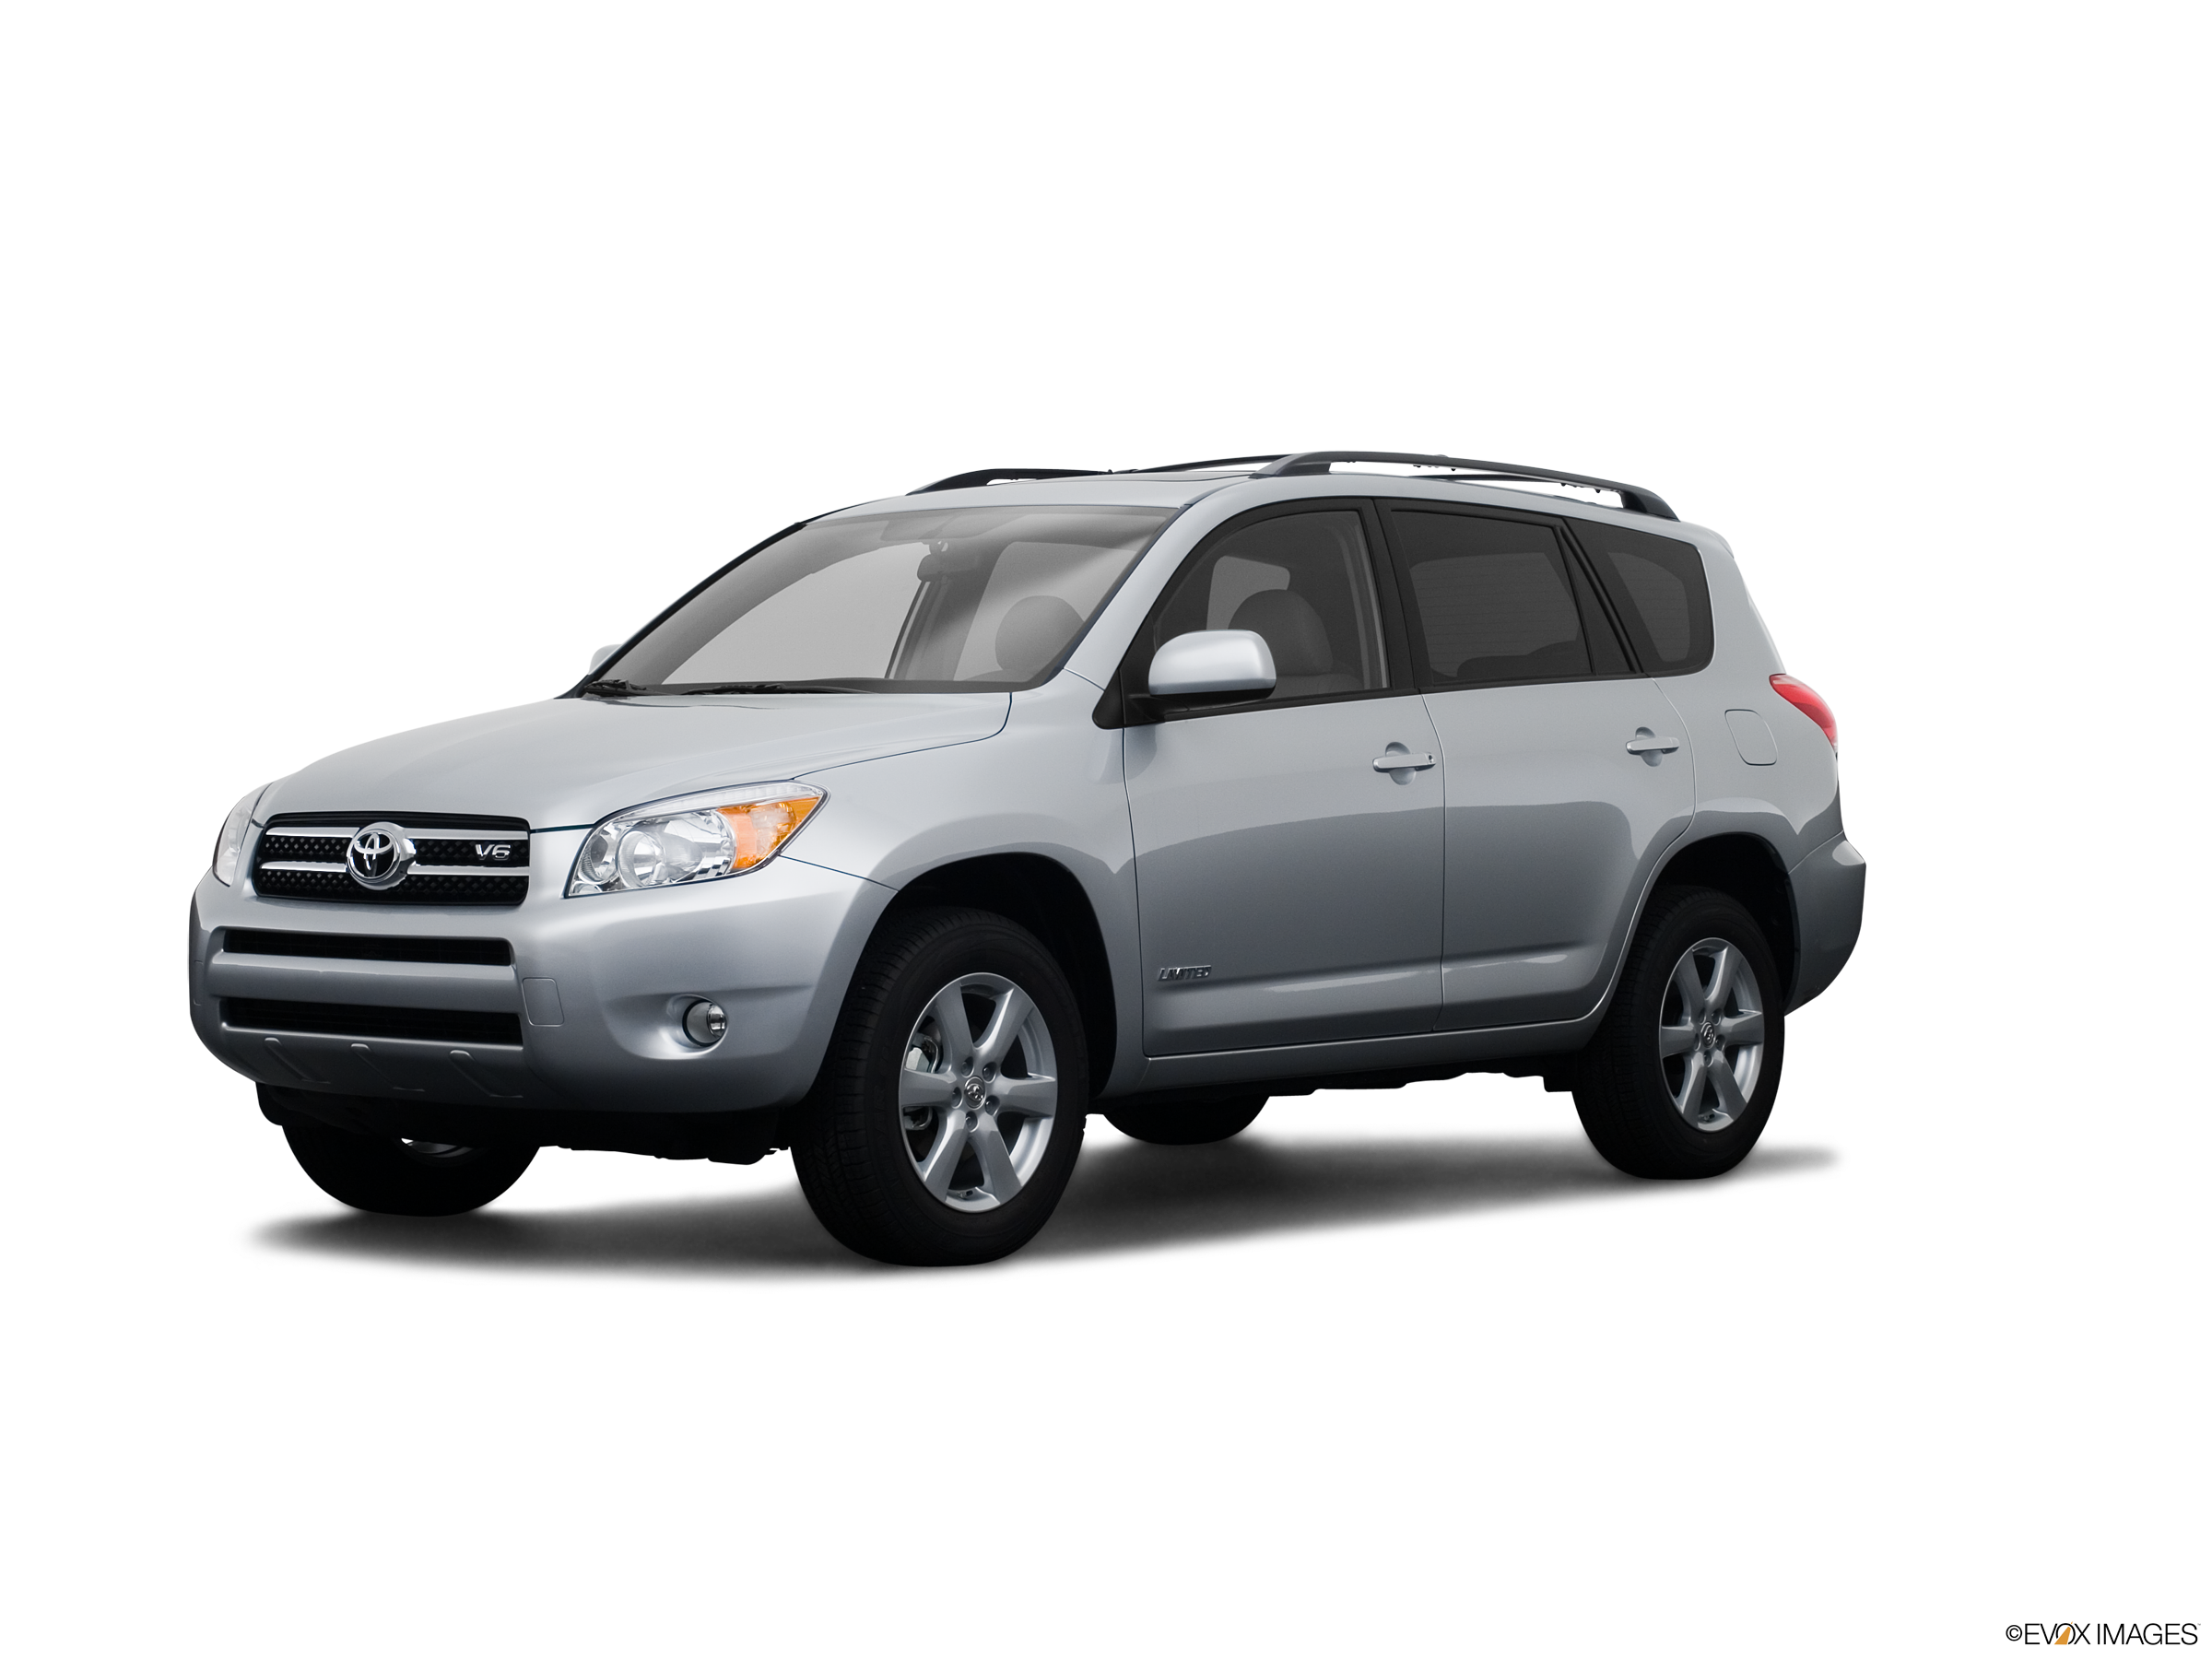 Used 2008 Toyota RAV4 Limited Sport Utility 4D Pricing | Kelley Blue Book